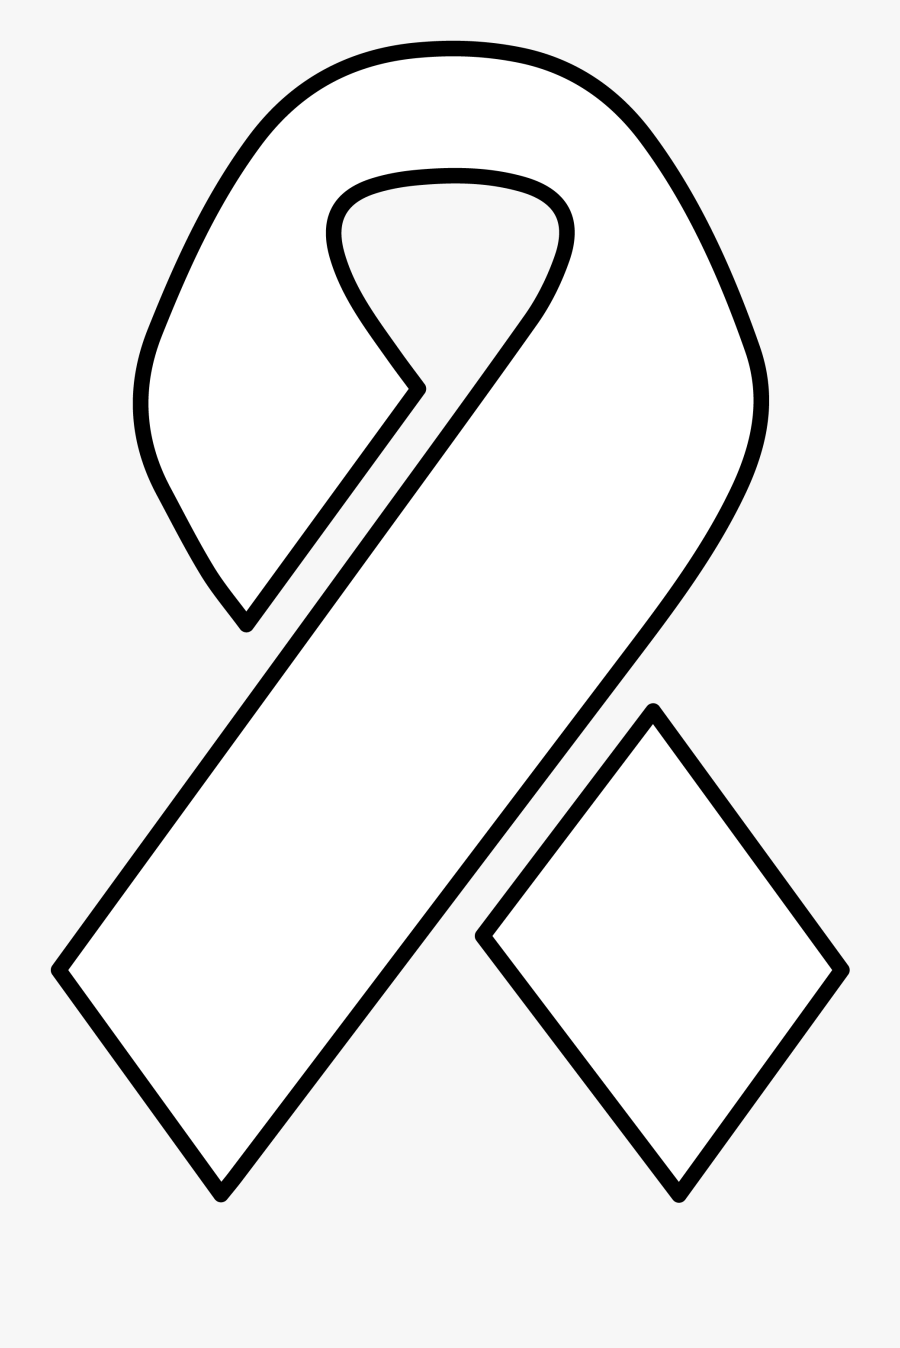 White Ribbon South Africa Archives - Prevent Cancer Icon, Transparent Clipart